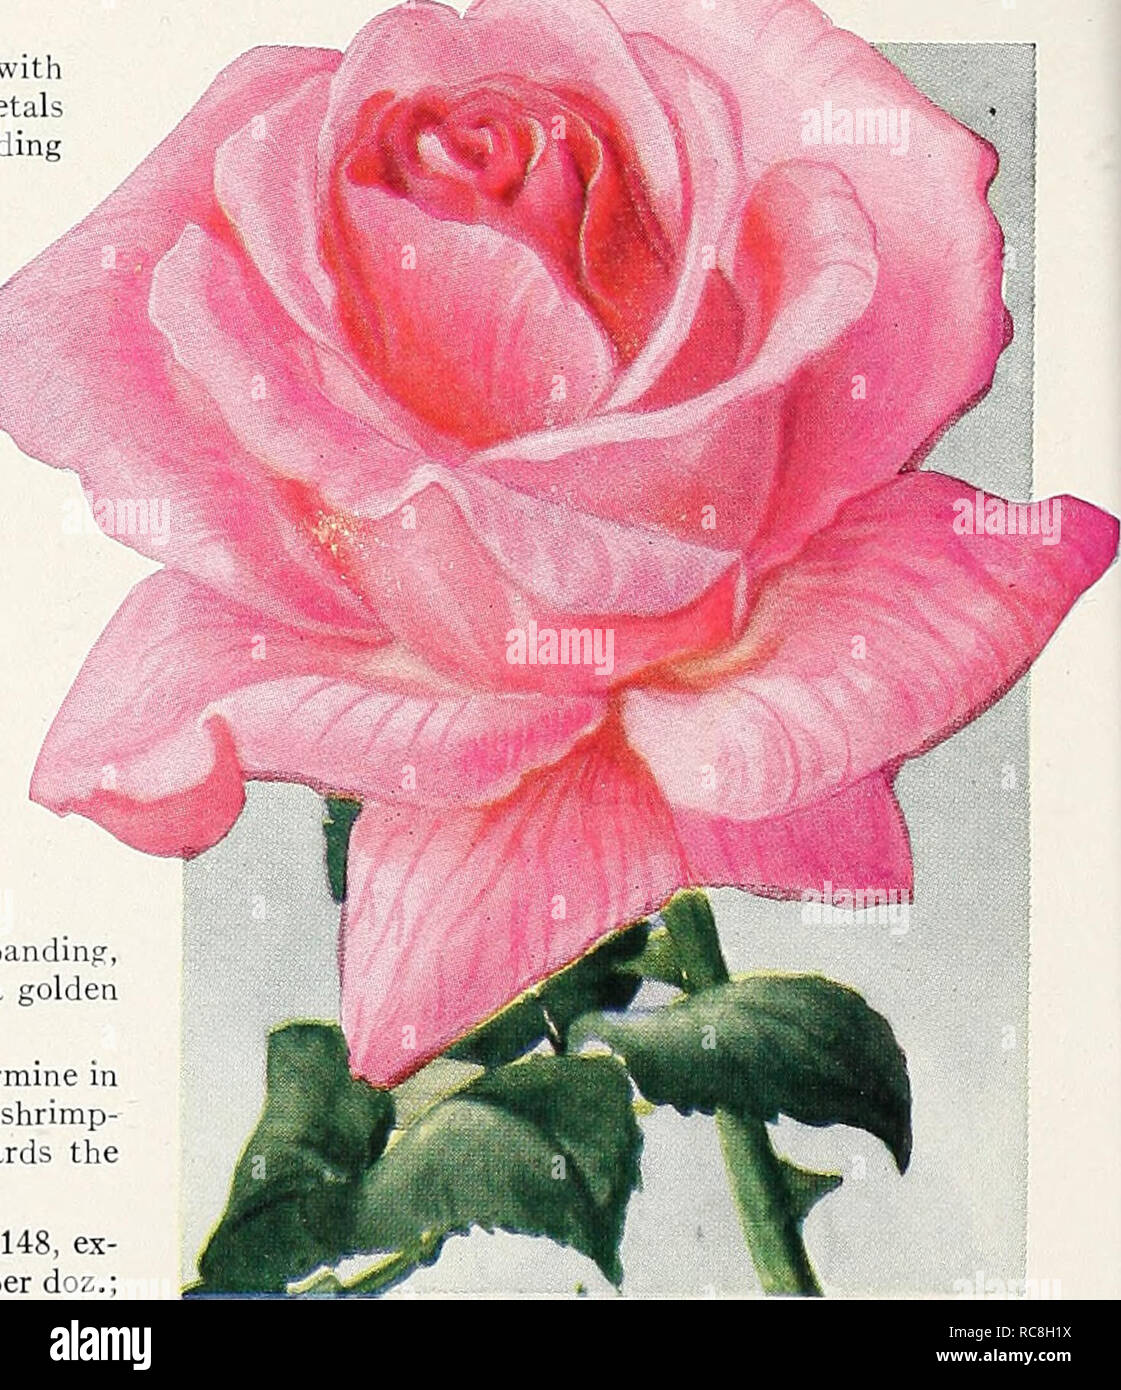 . Dreer's garden book 1929. Seeds Catalogs; Nursery stock Catalogs; Gardening Equipment and supplies Catalogs; Flowers Seeds Catalogs; Vegetables Seeds Catalogs; Fruit Seeds Catalogs. New Hybrid-Tea Rose, Mrs. Erskine Pembroke Thom Select Hybrid-Tea Roses Reims. Large flowers of very regular and perfect form, petals round, very large, imbricated like a Camellia. Color flesh white, yellow at base, centre bright nankin shaded orange-apricot, vigorous habit and very free flowering. Rose Marie. One of the best bedding Roses grown, re- markably free-flowering, producing large, long, ideal buds, whi Stock Photo